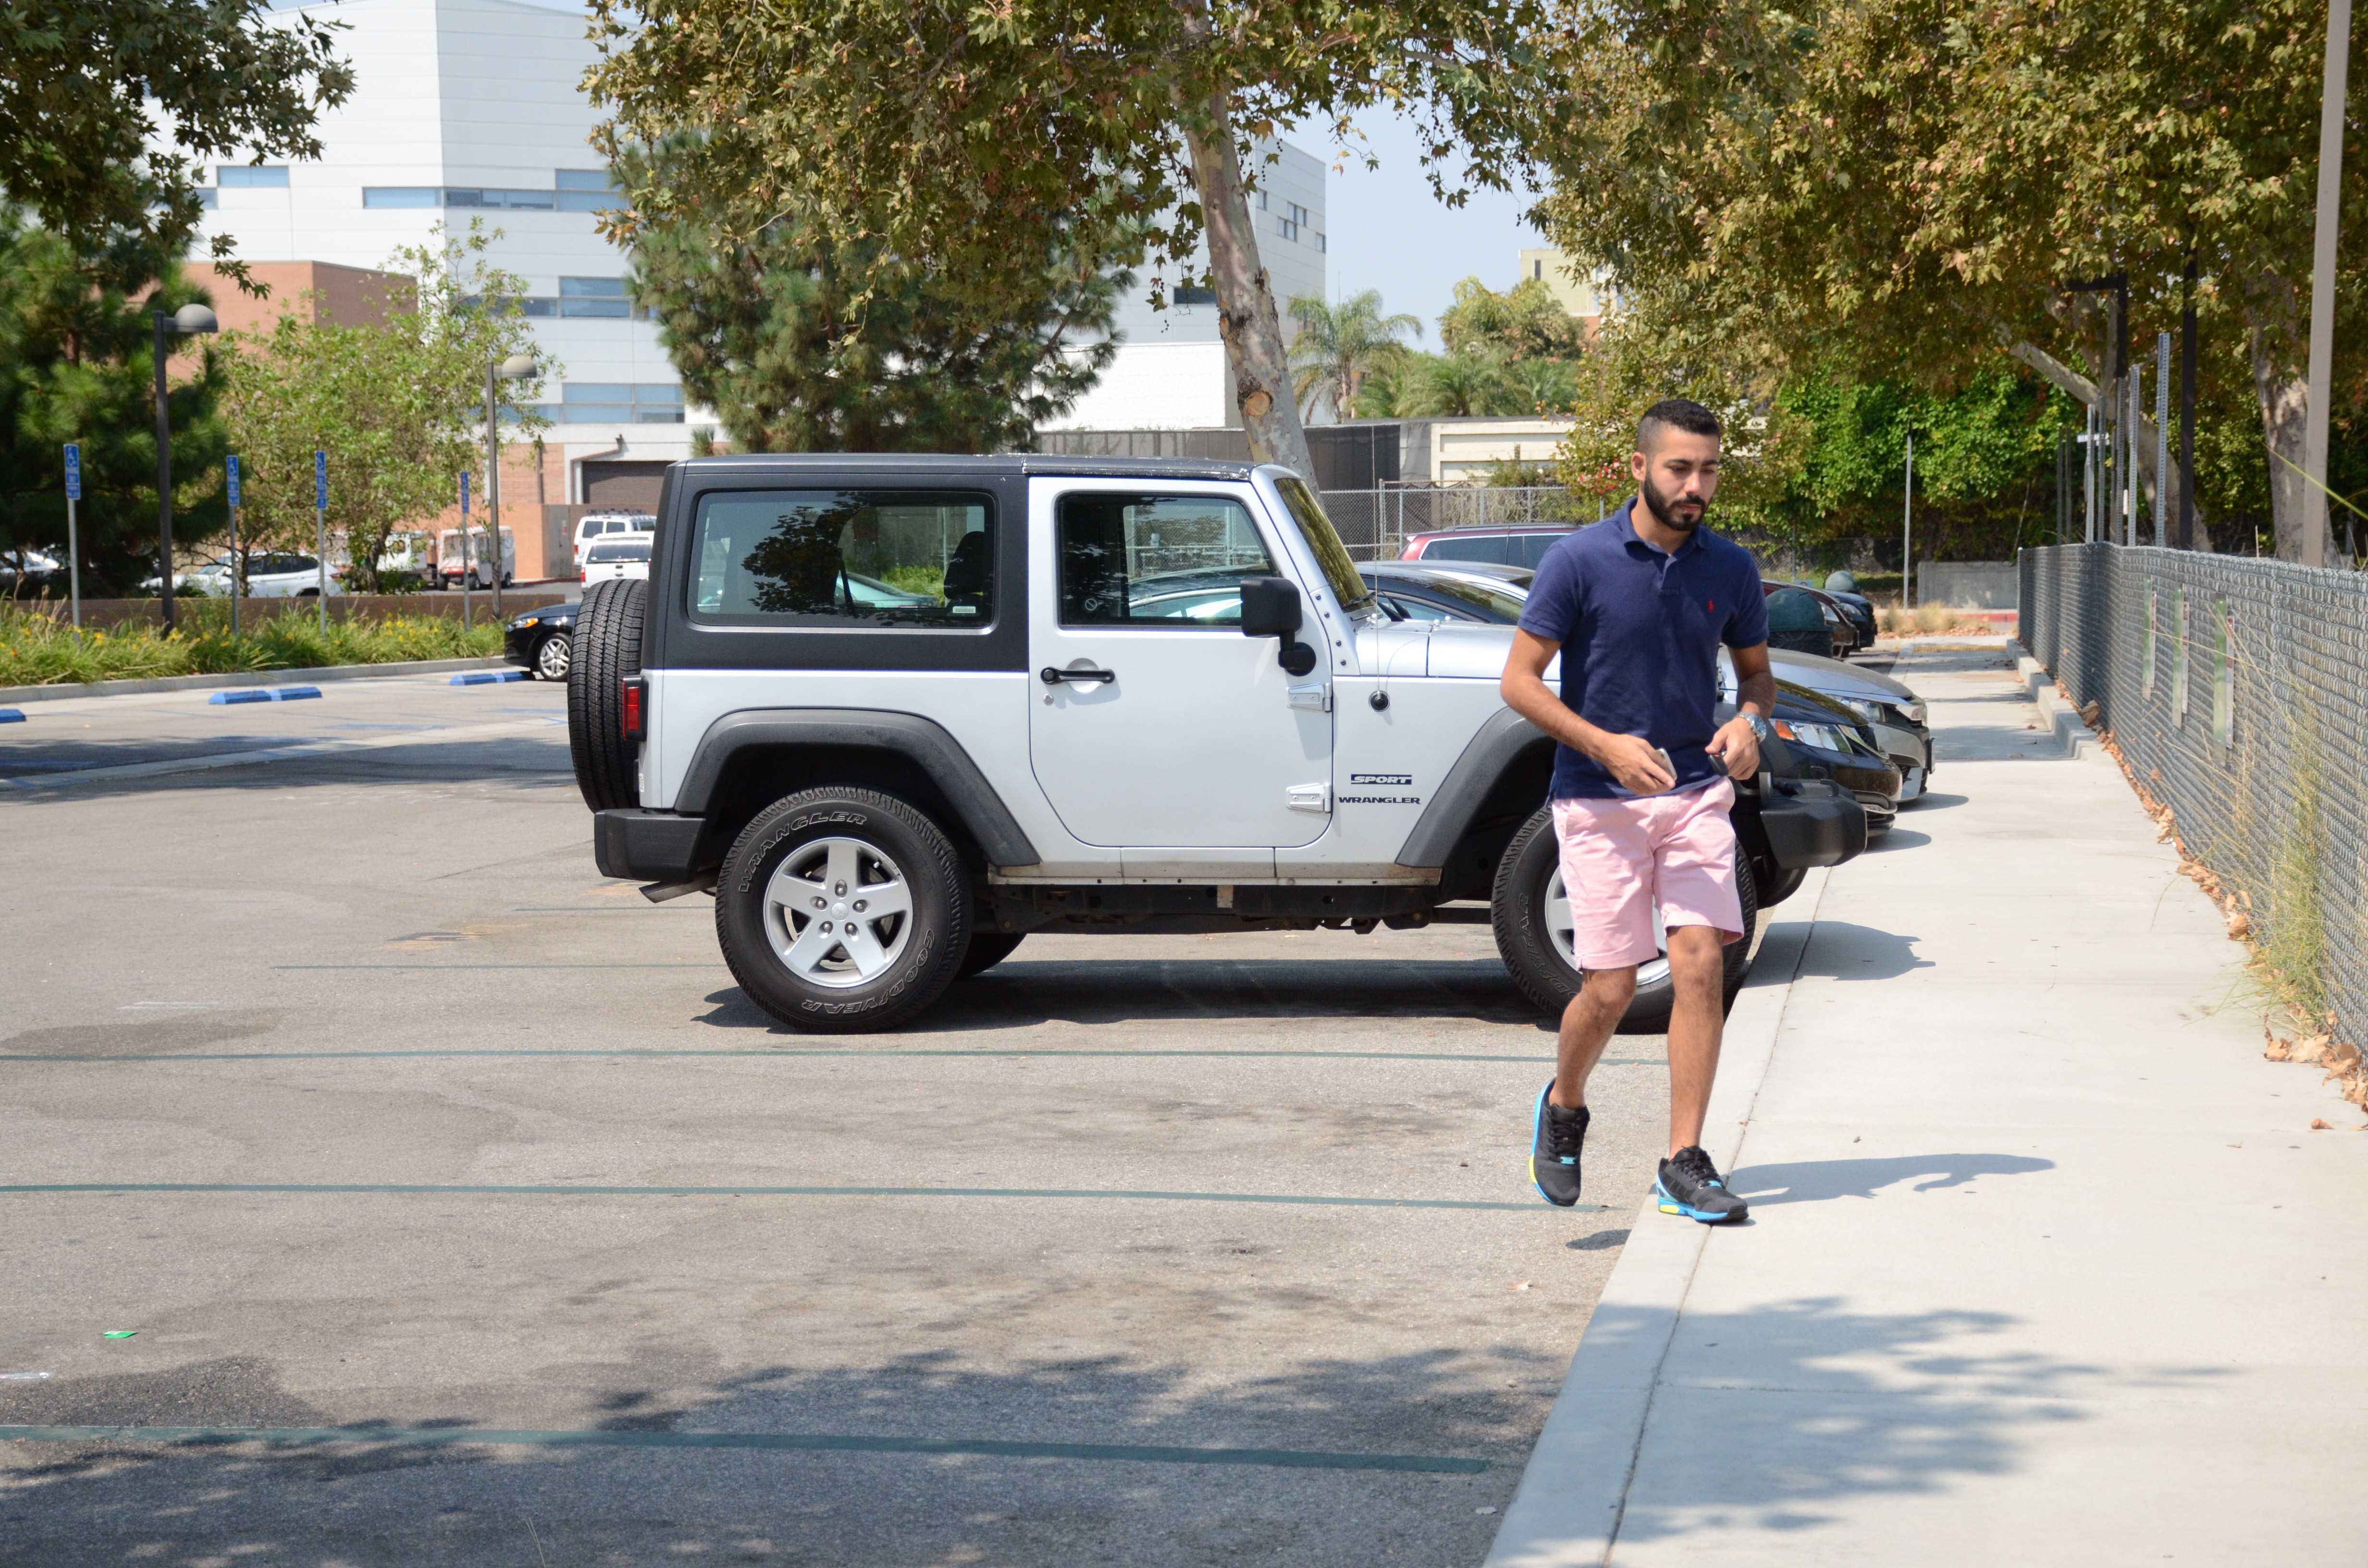 Student Khaled Alotaibi walks away from his car after parking near the Student Recreation Center on Thursday, August 25. Photo credit: Erik Luna